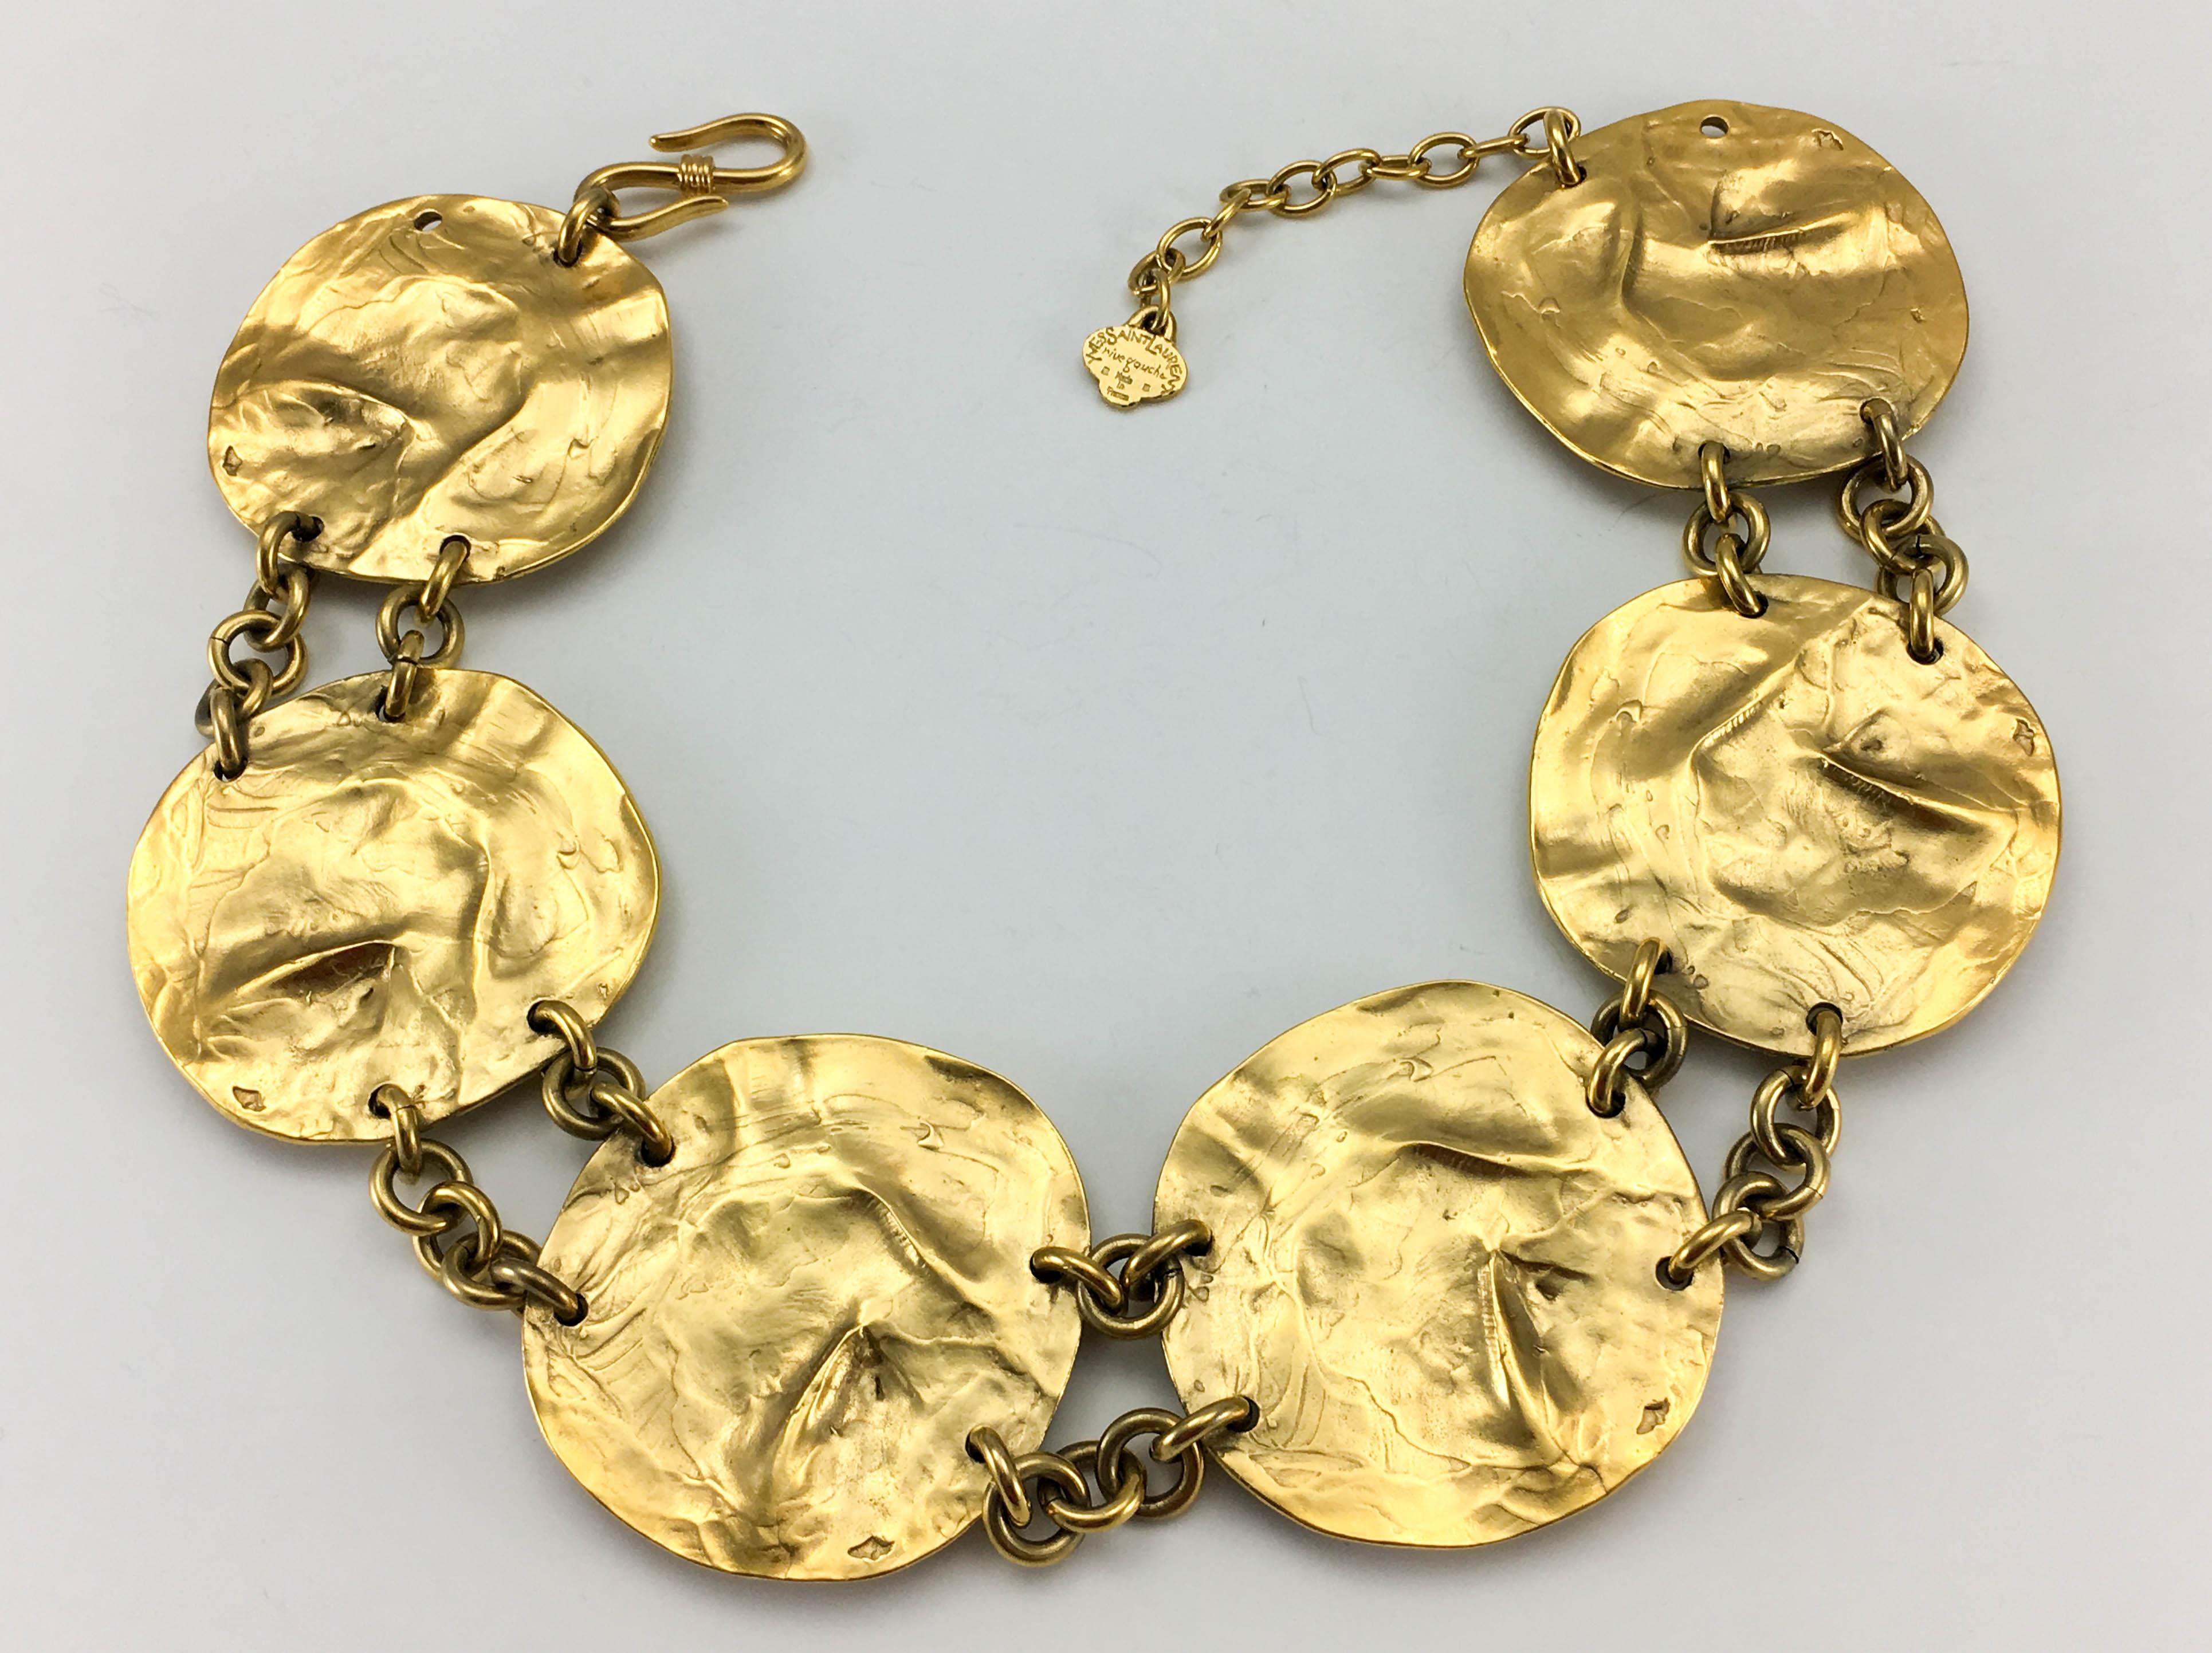 Yves Saint Laurent by Robert Goossens Gold-Plated Disk Necklace, 1989   4